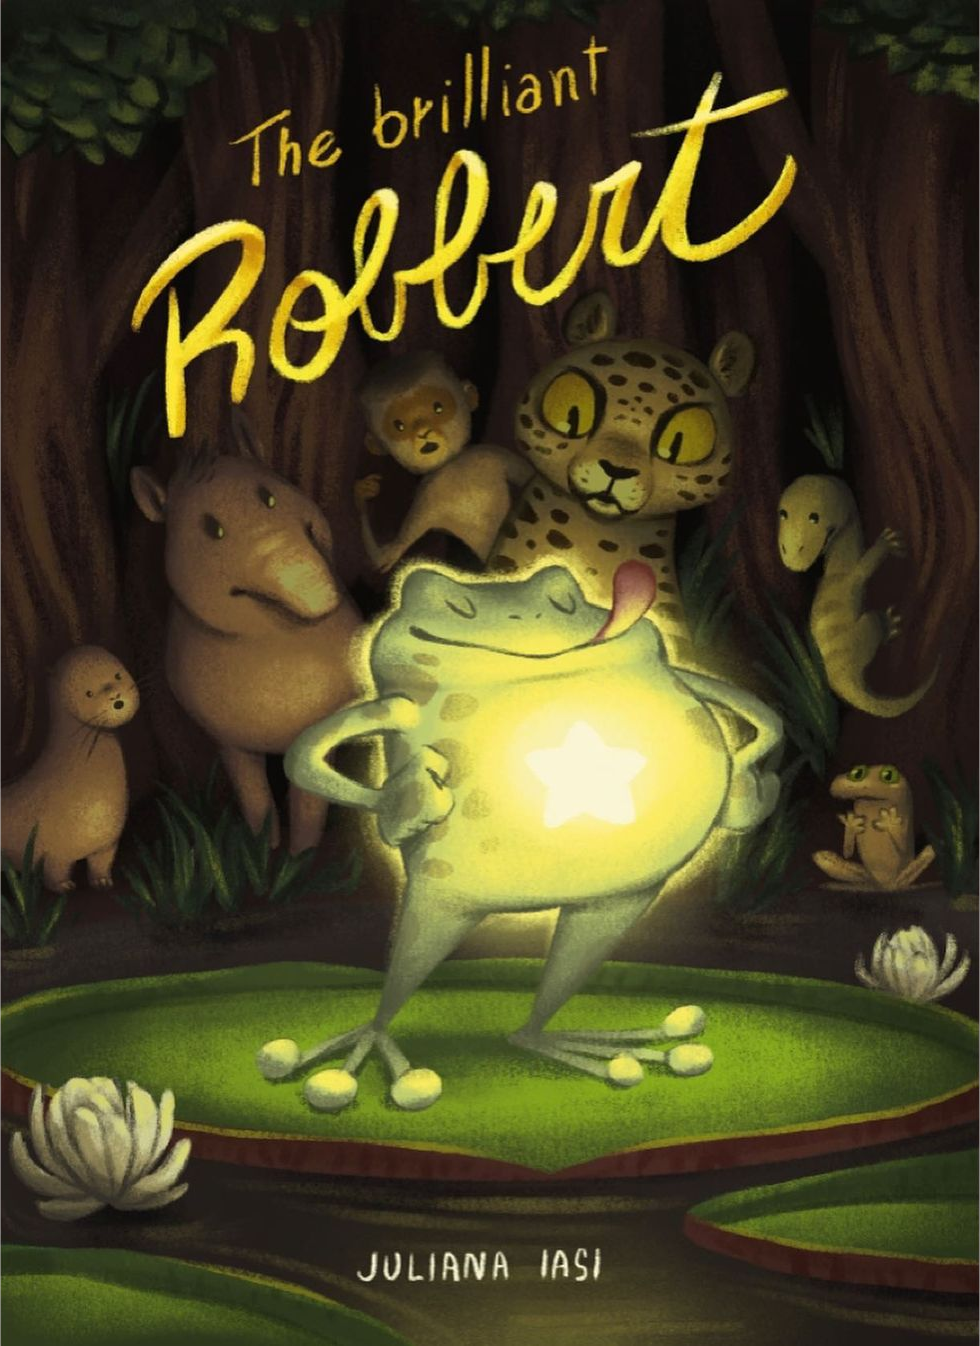 Book cover containing a shining frog in the center and other animals from the Pantanal admired around it, with the title 'The brilliant Robbert'